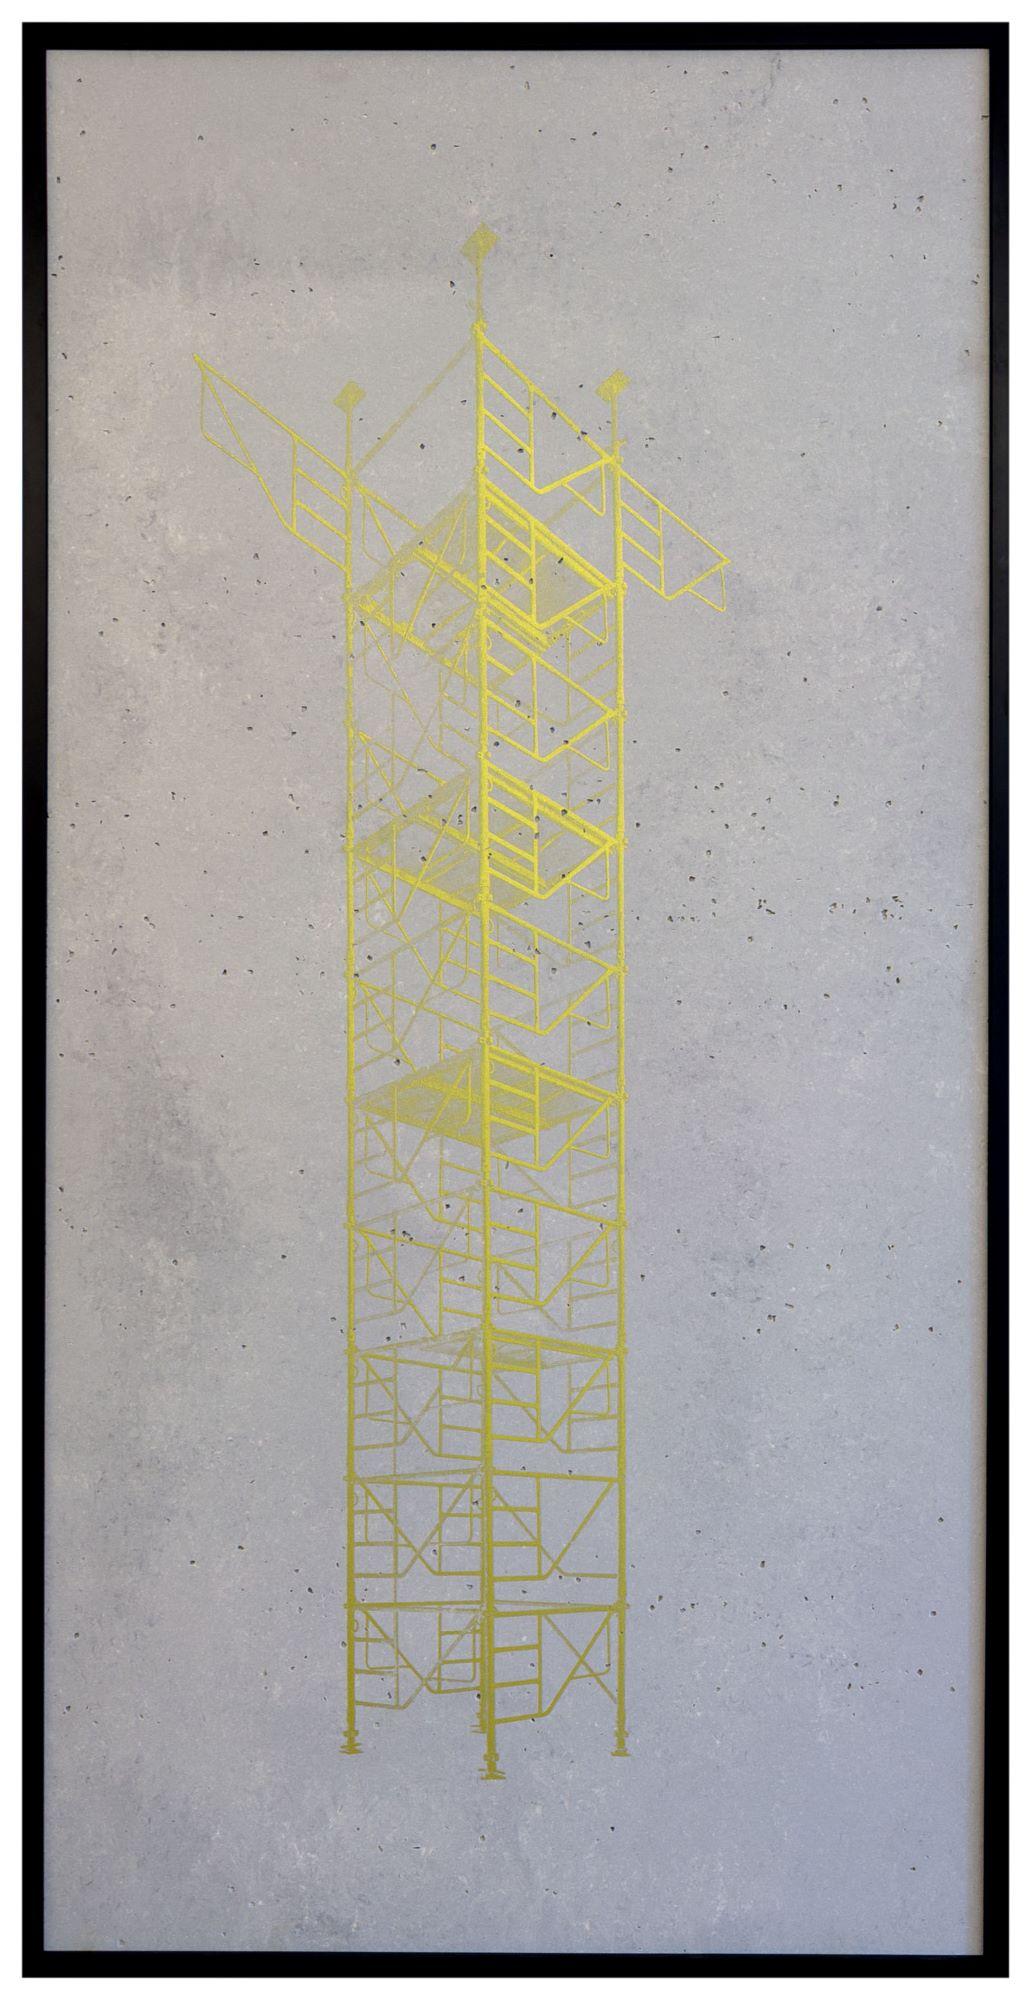 Concrete Scaffolding 01 is a limited-edition photograph by contemporary artist Bruno Fontana. This photograph is a screen printing with gold ink on concrete stoneware. Dimensions are 120 × 60 cm (47.2 × 23.6 in). The artwork is sold with a black